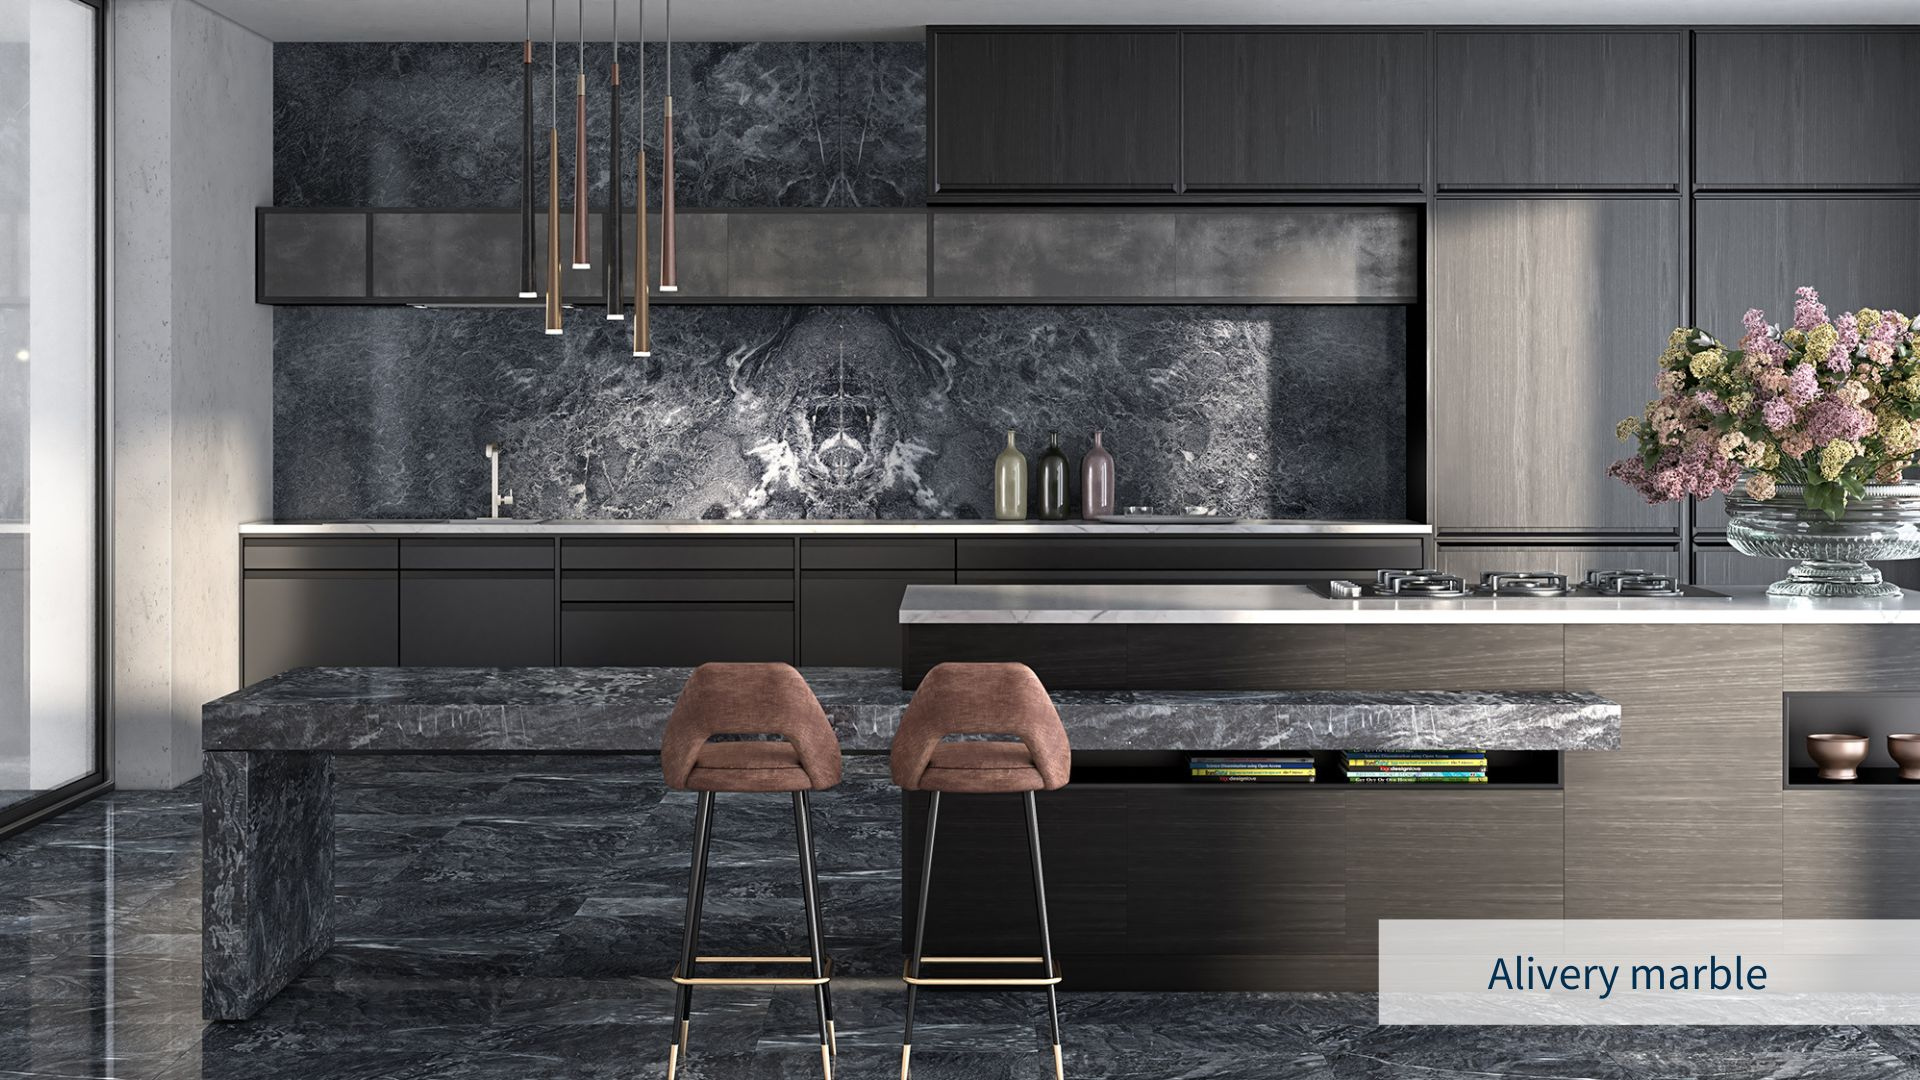 Elegant kitchen rendering with dark marble on the wall, countertop, and floor tiles, combined with neutral tones of furniture for a dark aesthetic